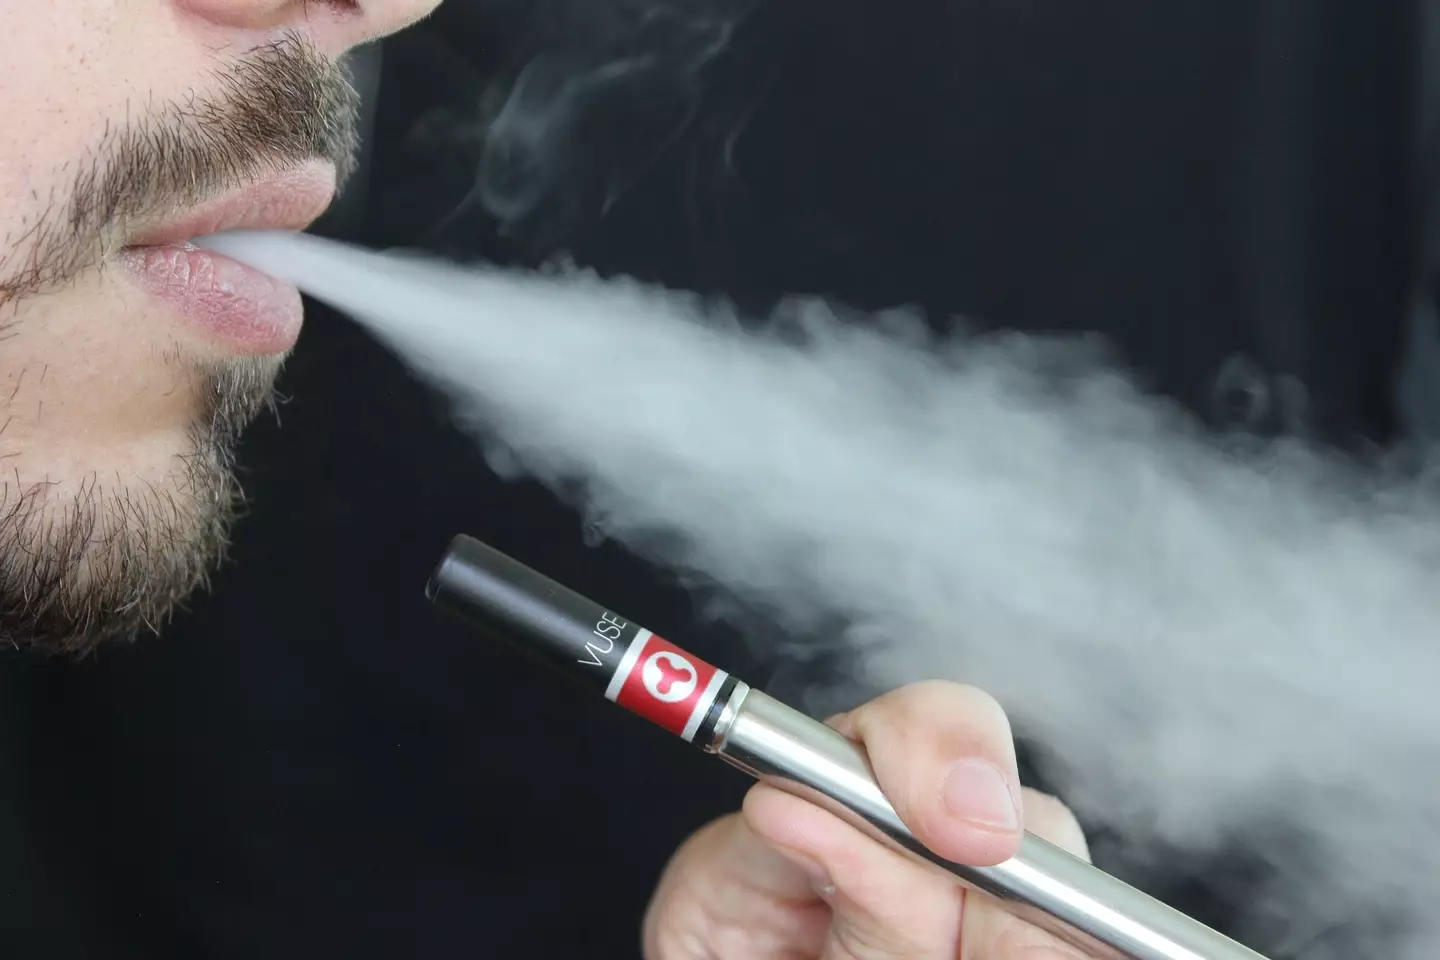 Doctors are worried over what long-term health effects may come from e-cigs.